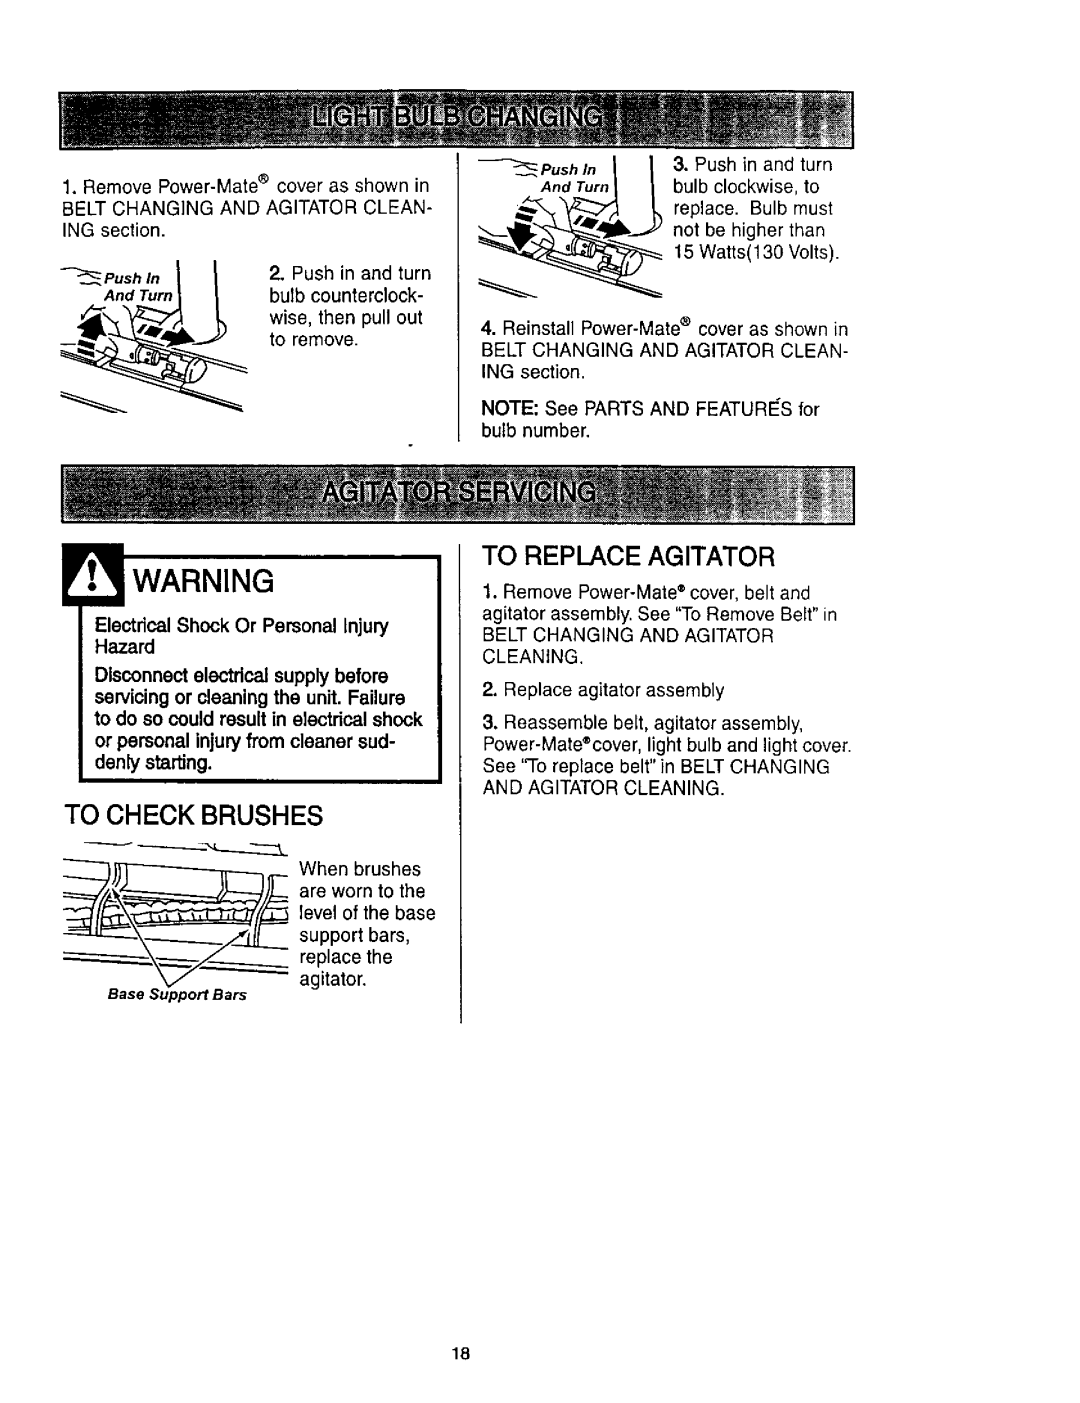 Kenmore 116.23637C owner manual E,f WARNING, To Replace Agitator, Whenbrushes, To Checkbrushes, And Turn 